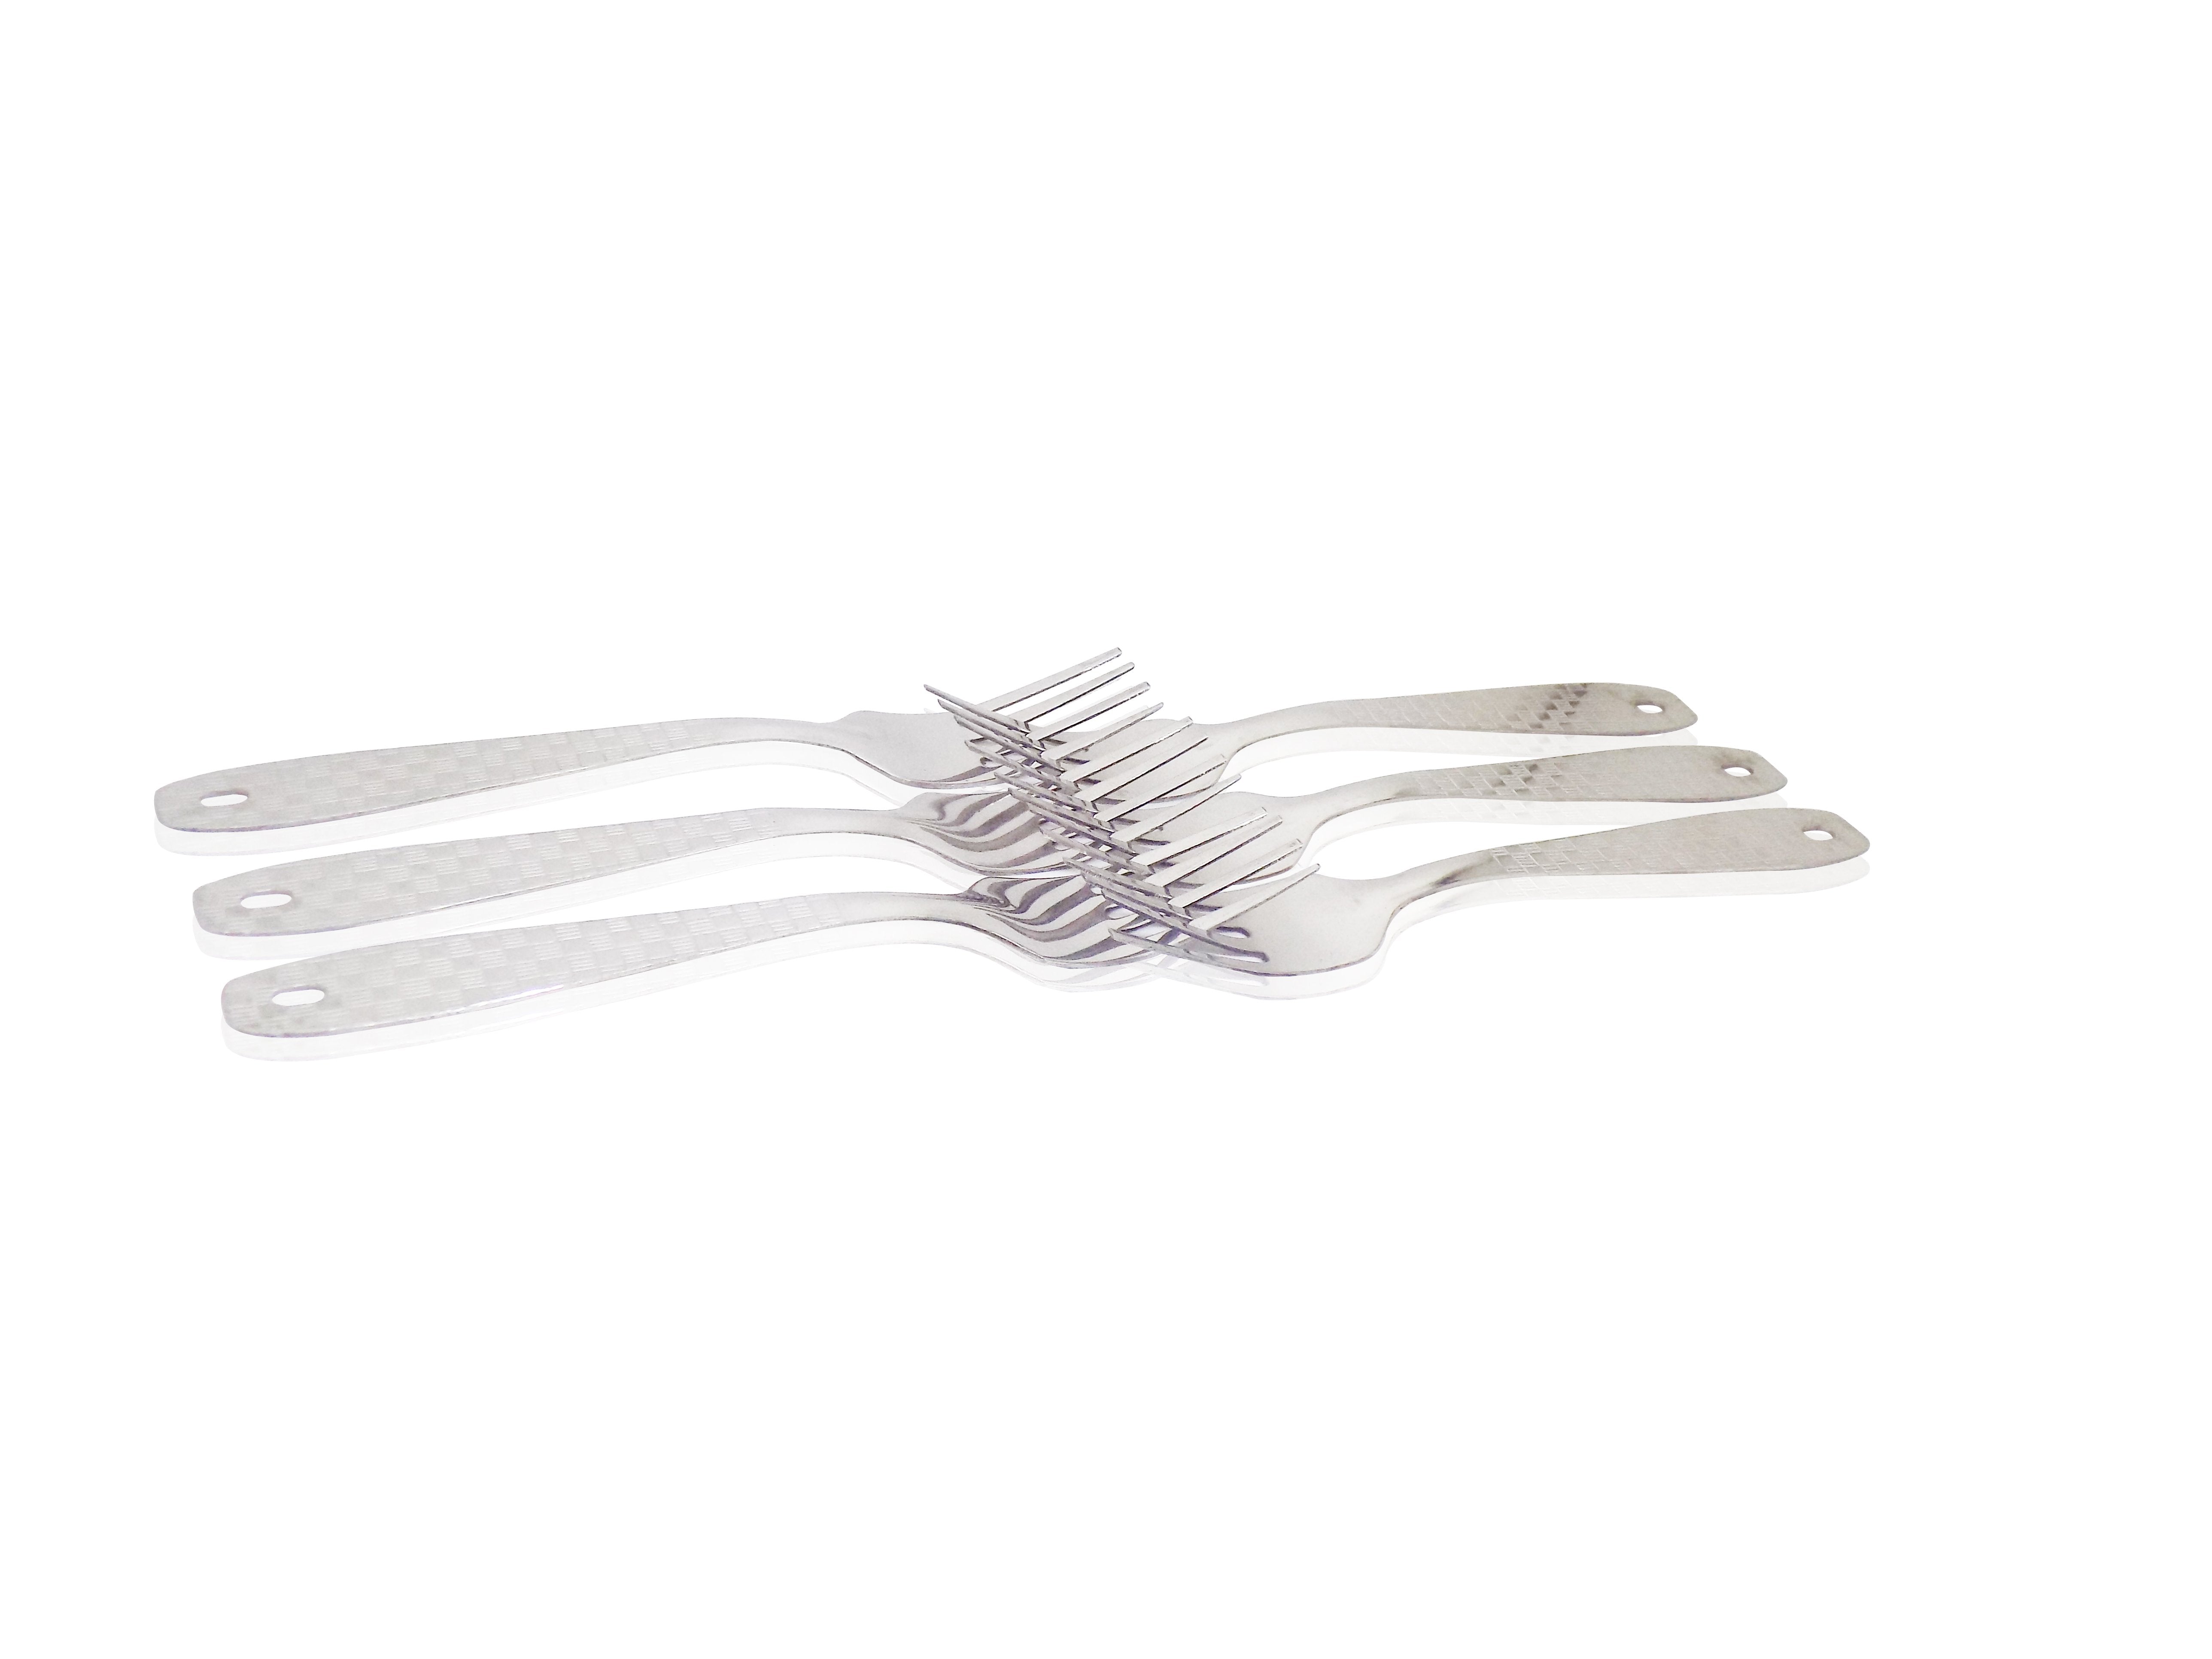 2095 Stainless Steel Cutlery Set with Stand - Pack of 24(Silver) - SkyShopy